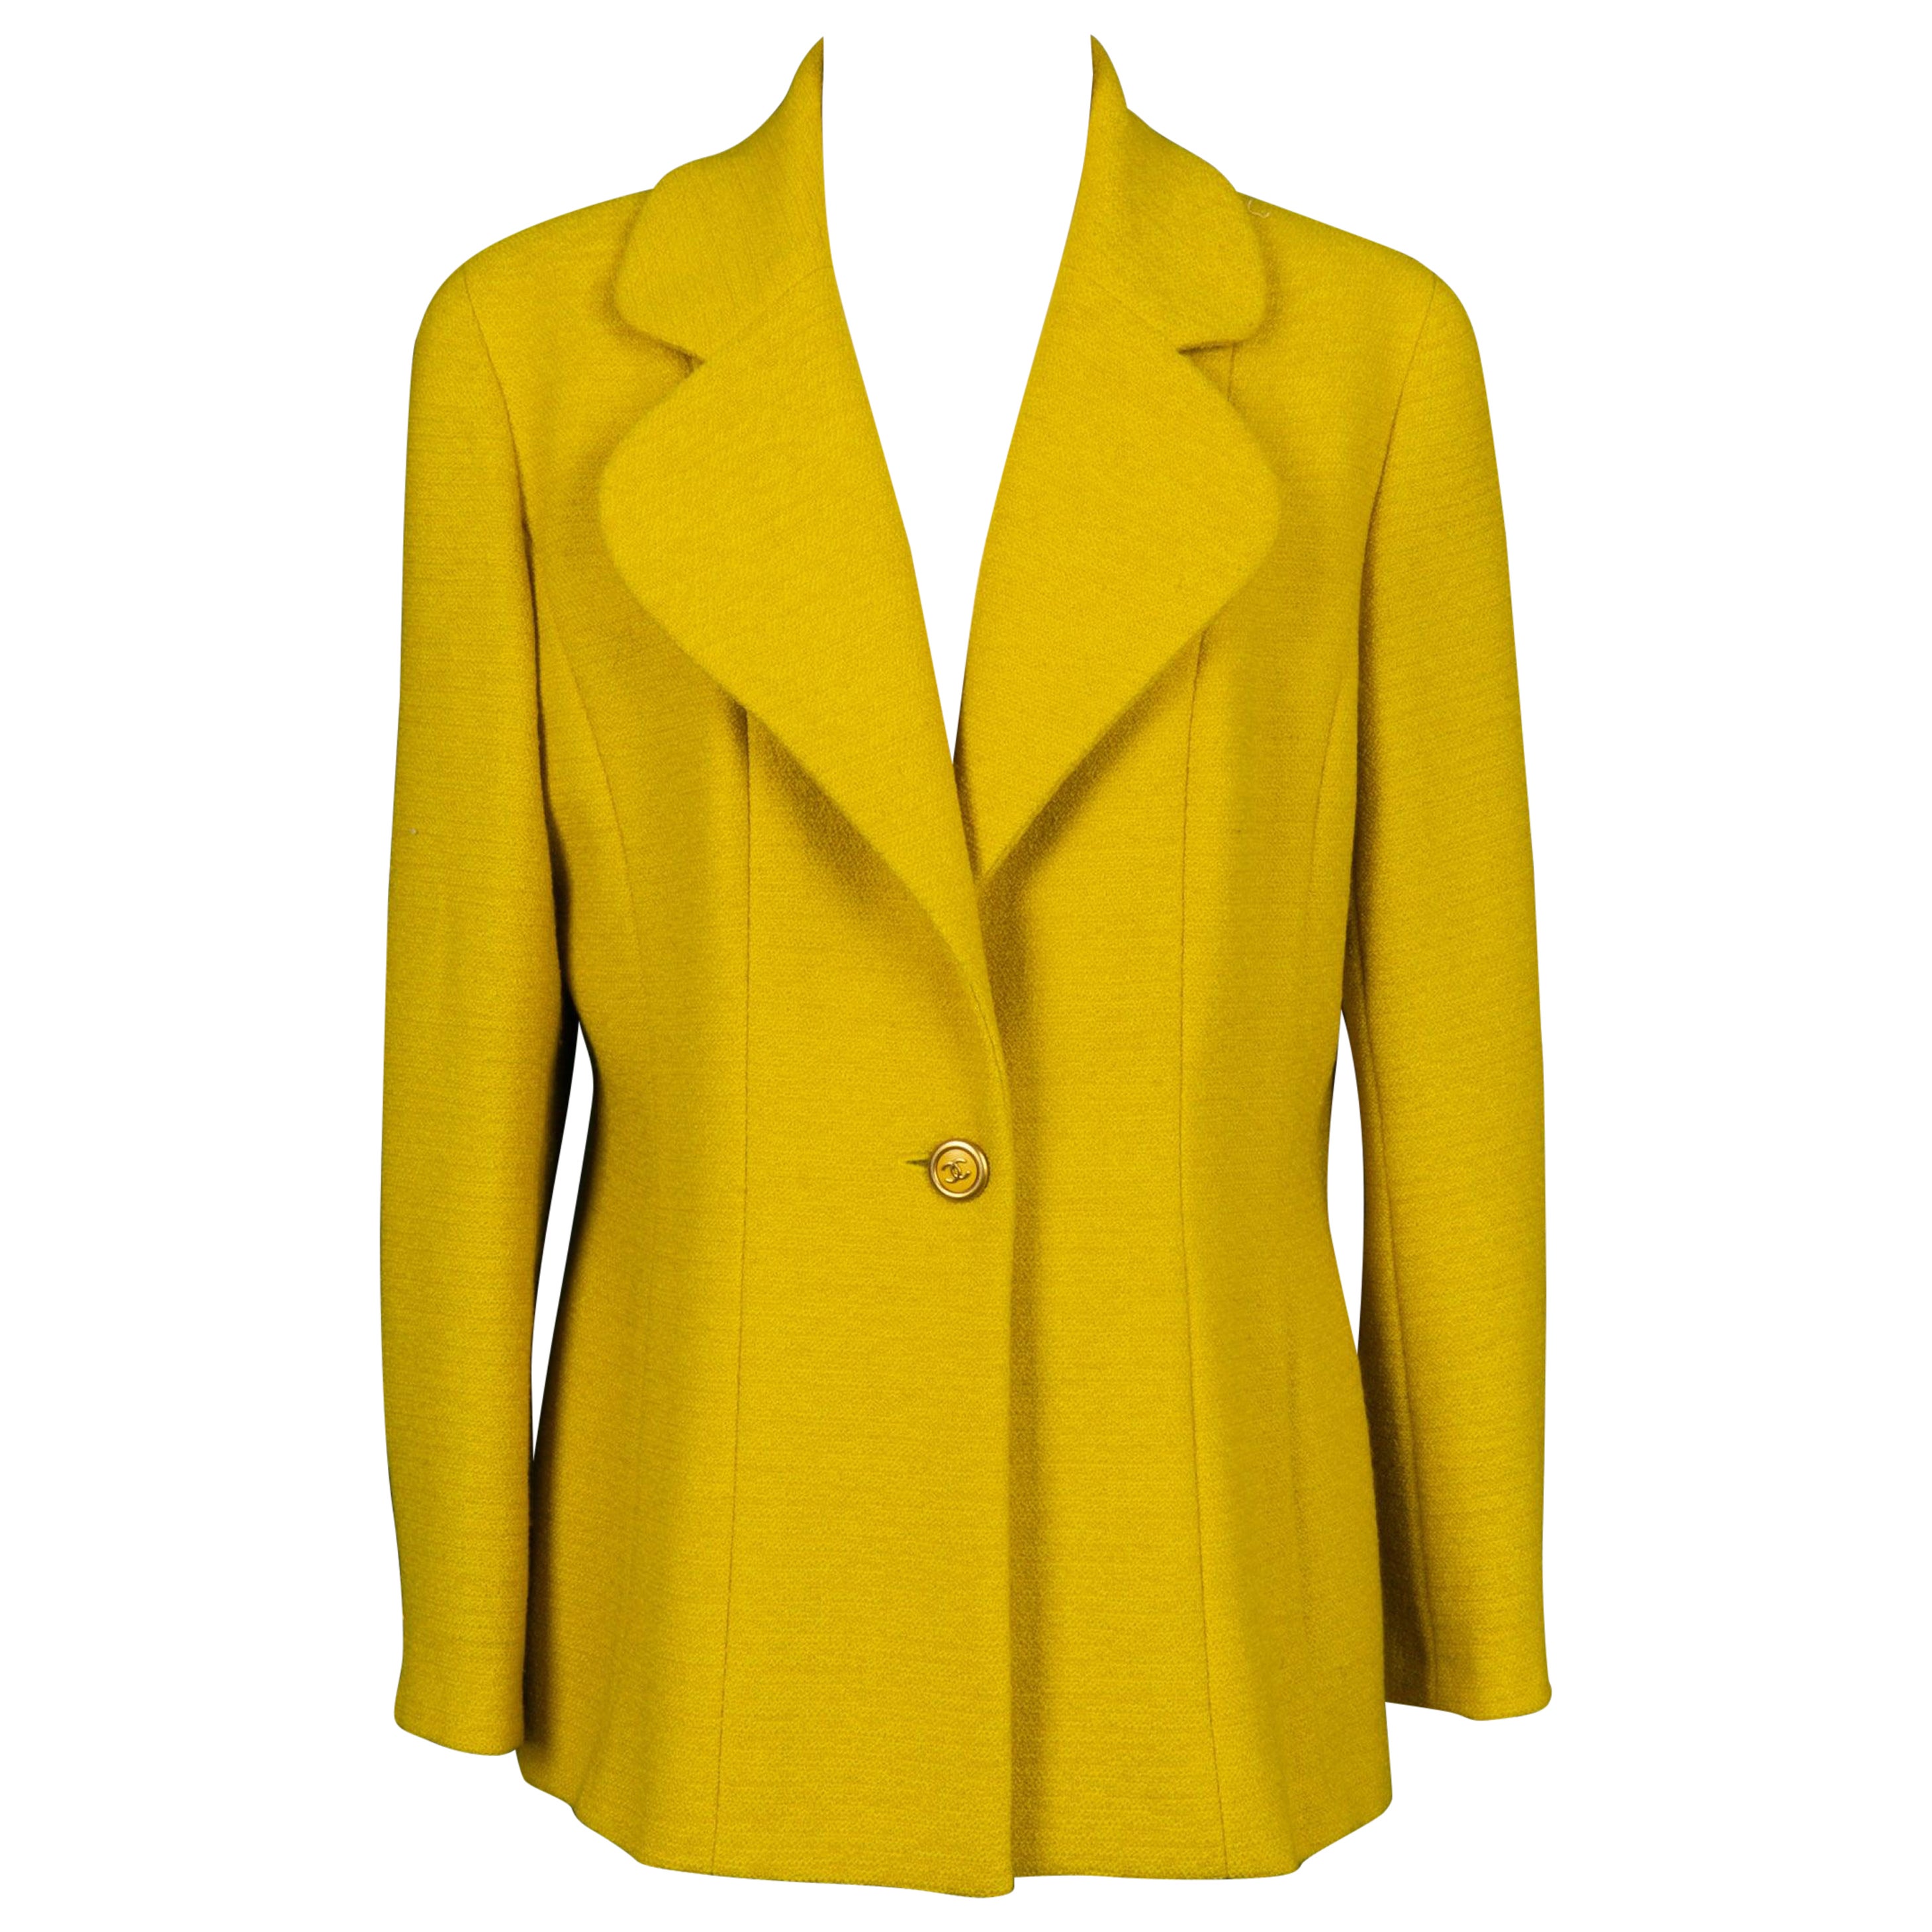 Chanel Wool Tweed Jacket with Yellow Silk Lining, 1994 For Sale